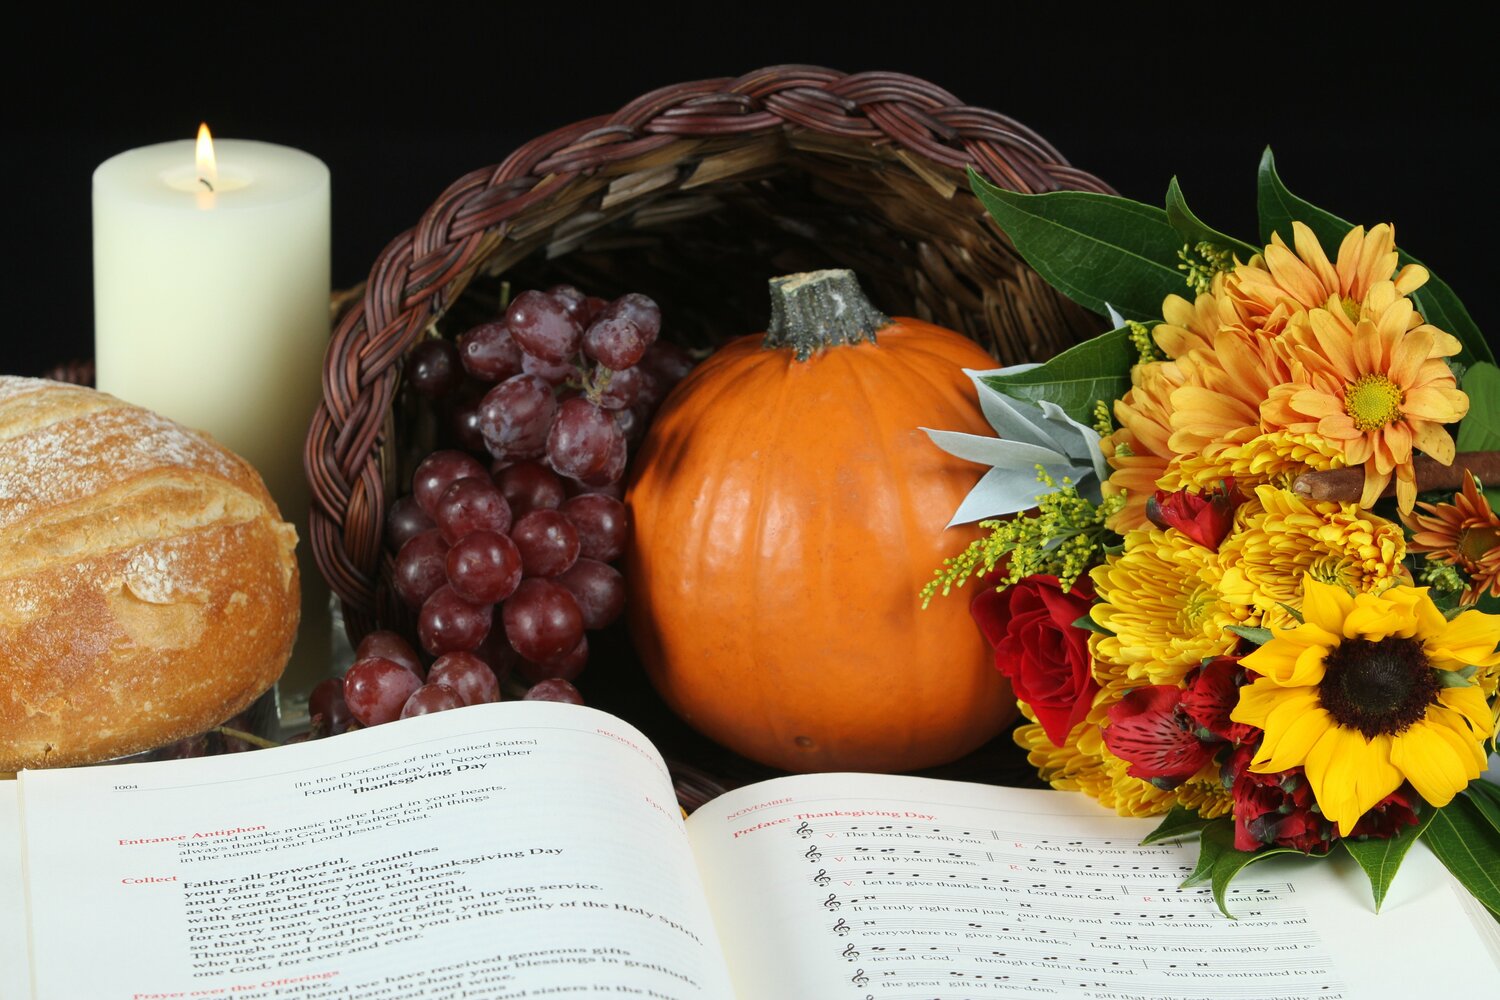 Thanksgiving Day, Nov. 23, 2023, celebrates an abundant harvest and the blessing of family and friends. "Bless the God of all, who has done wondrous things on earth." -- Sirach 50:22.